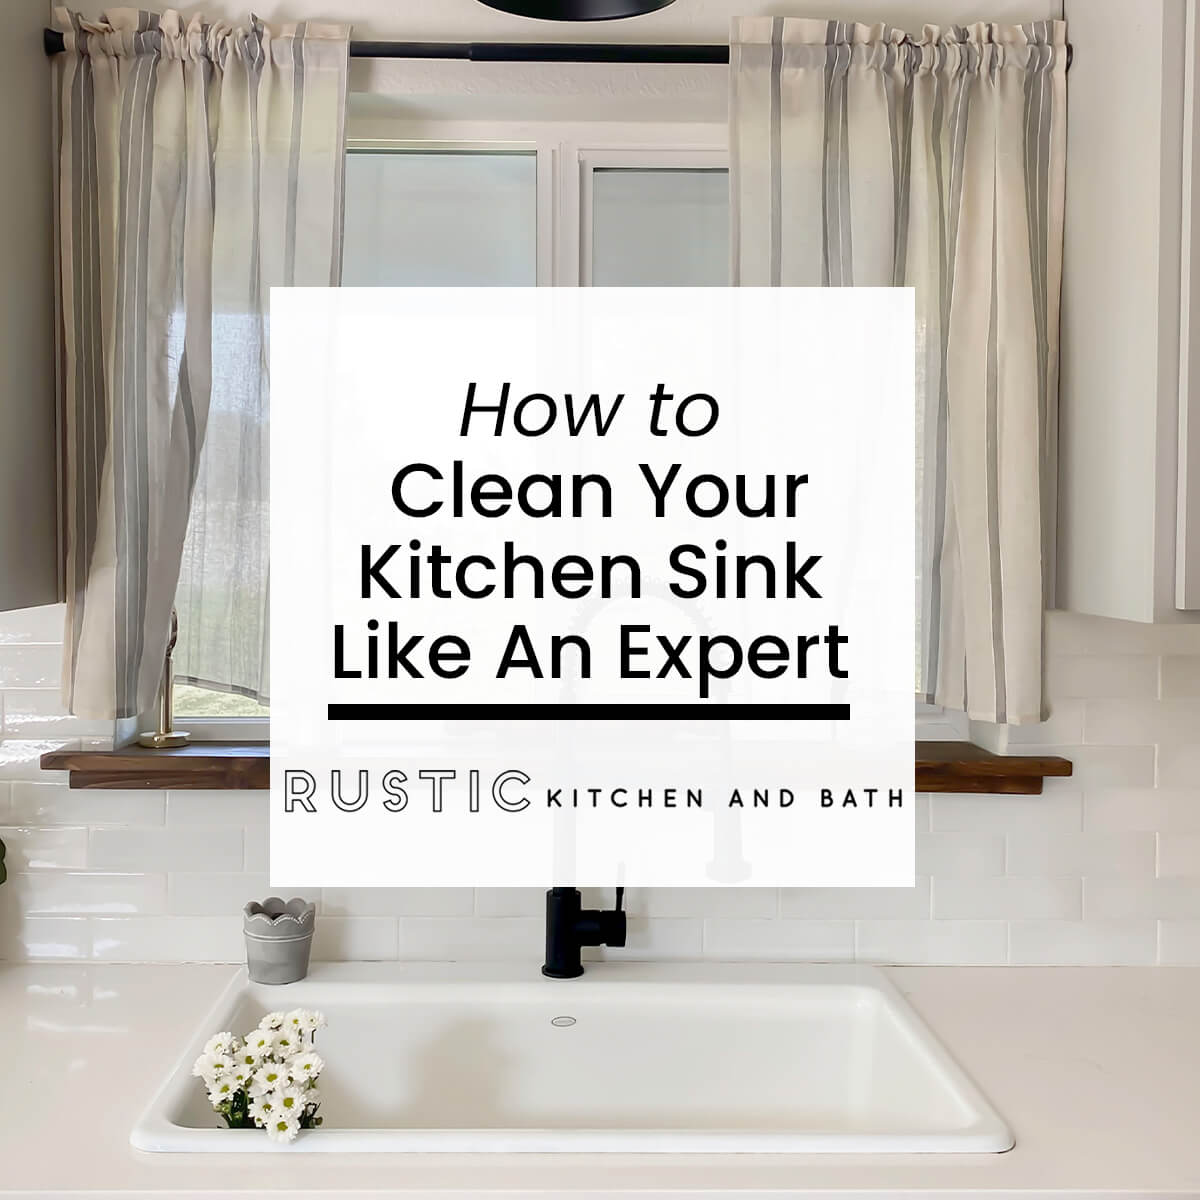 How To Clean Your Kitchen Sink Like An Expert